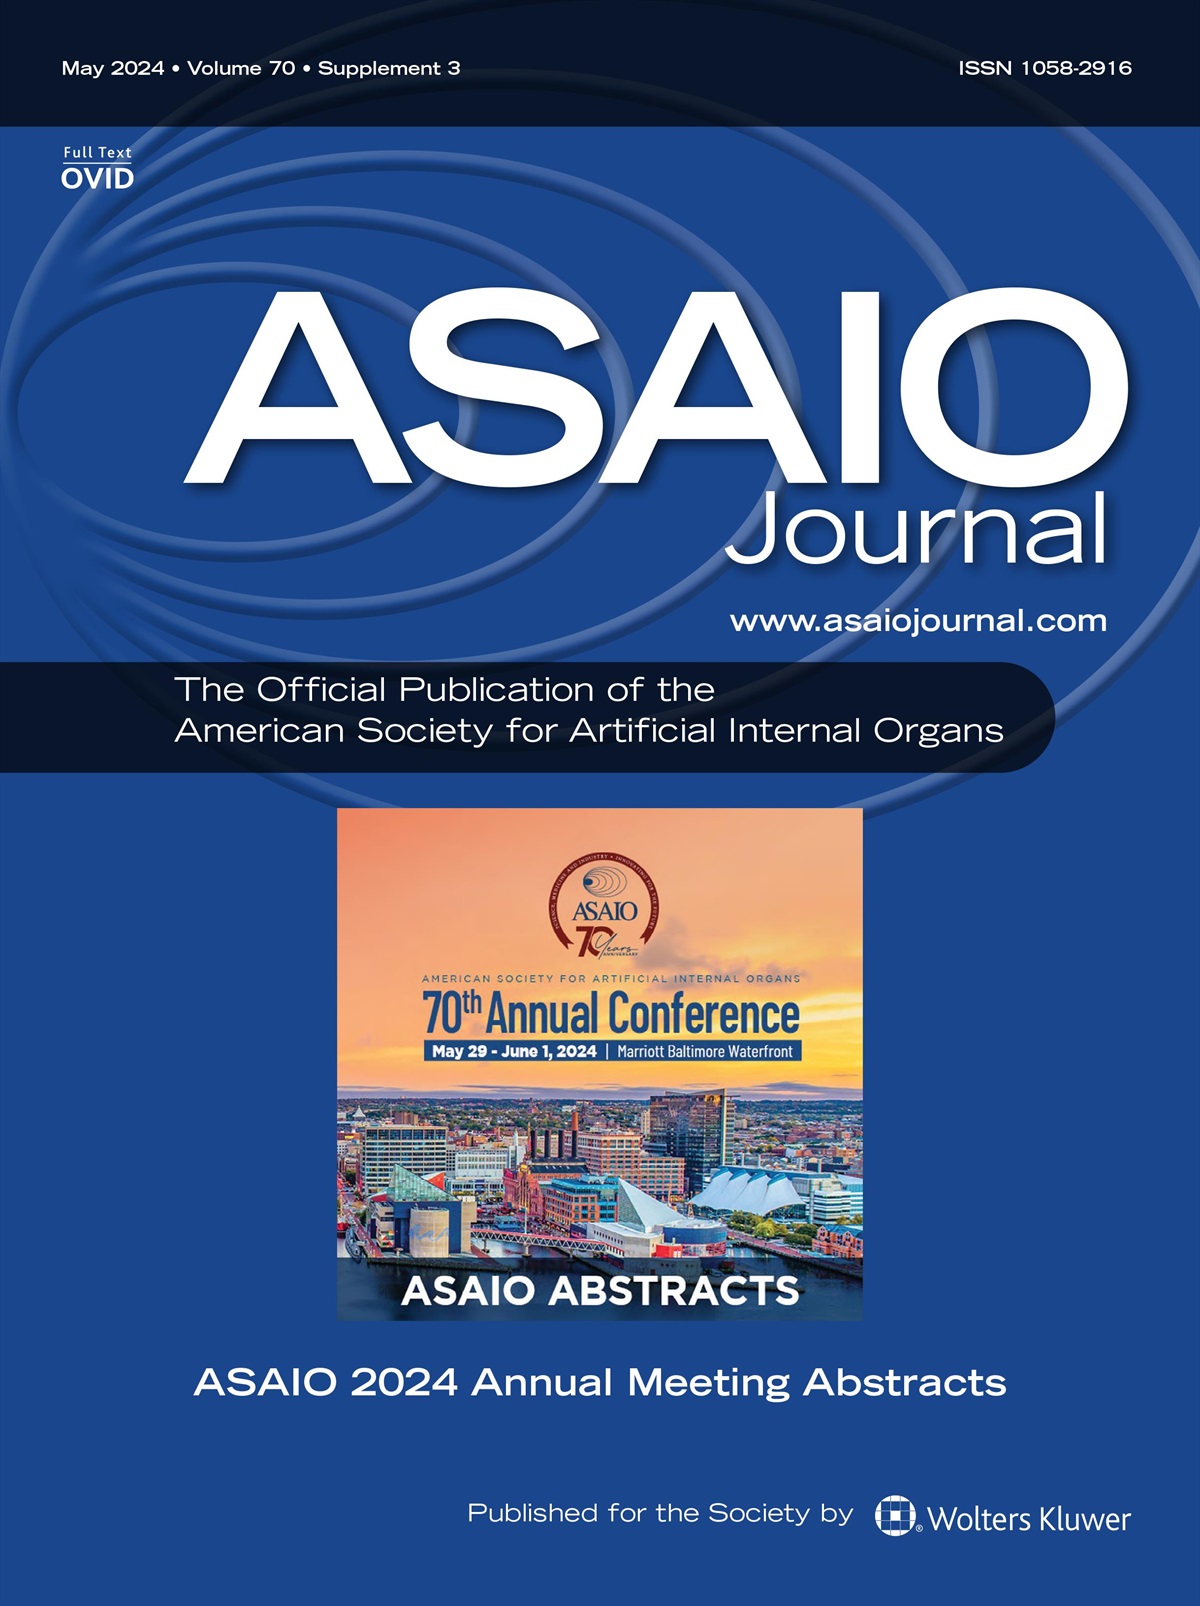 ASAIO 2024 70th Annual Meeting Abstracts